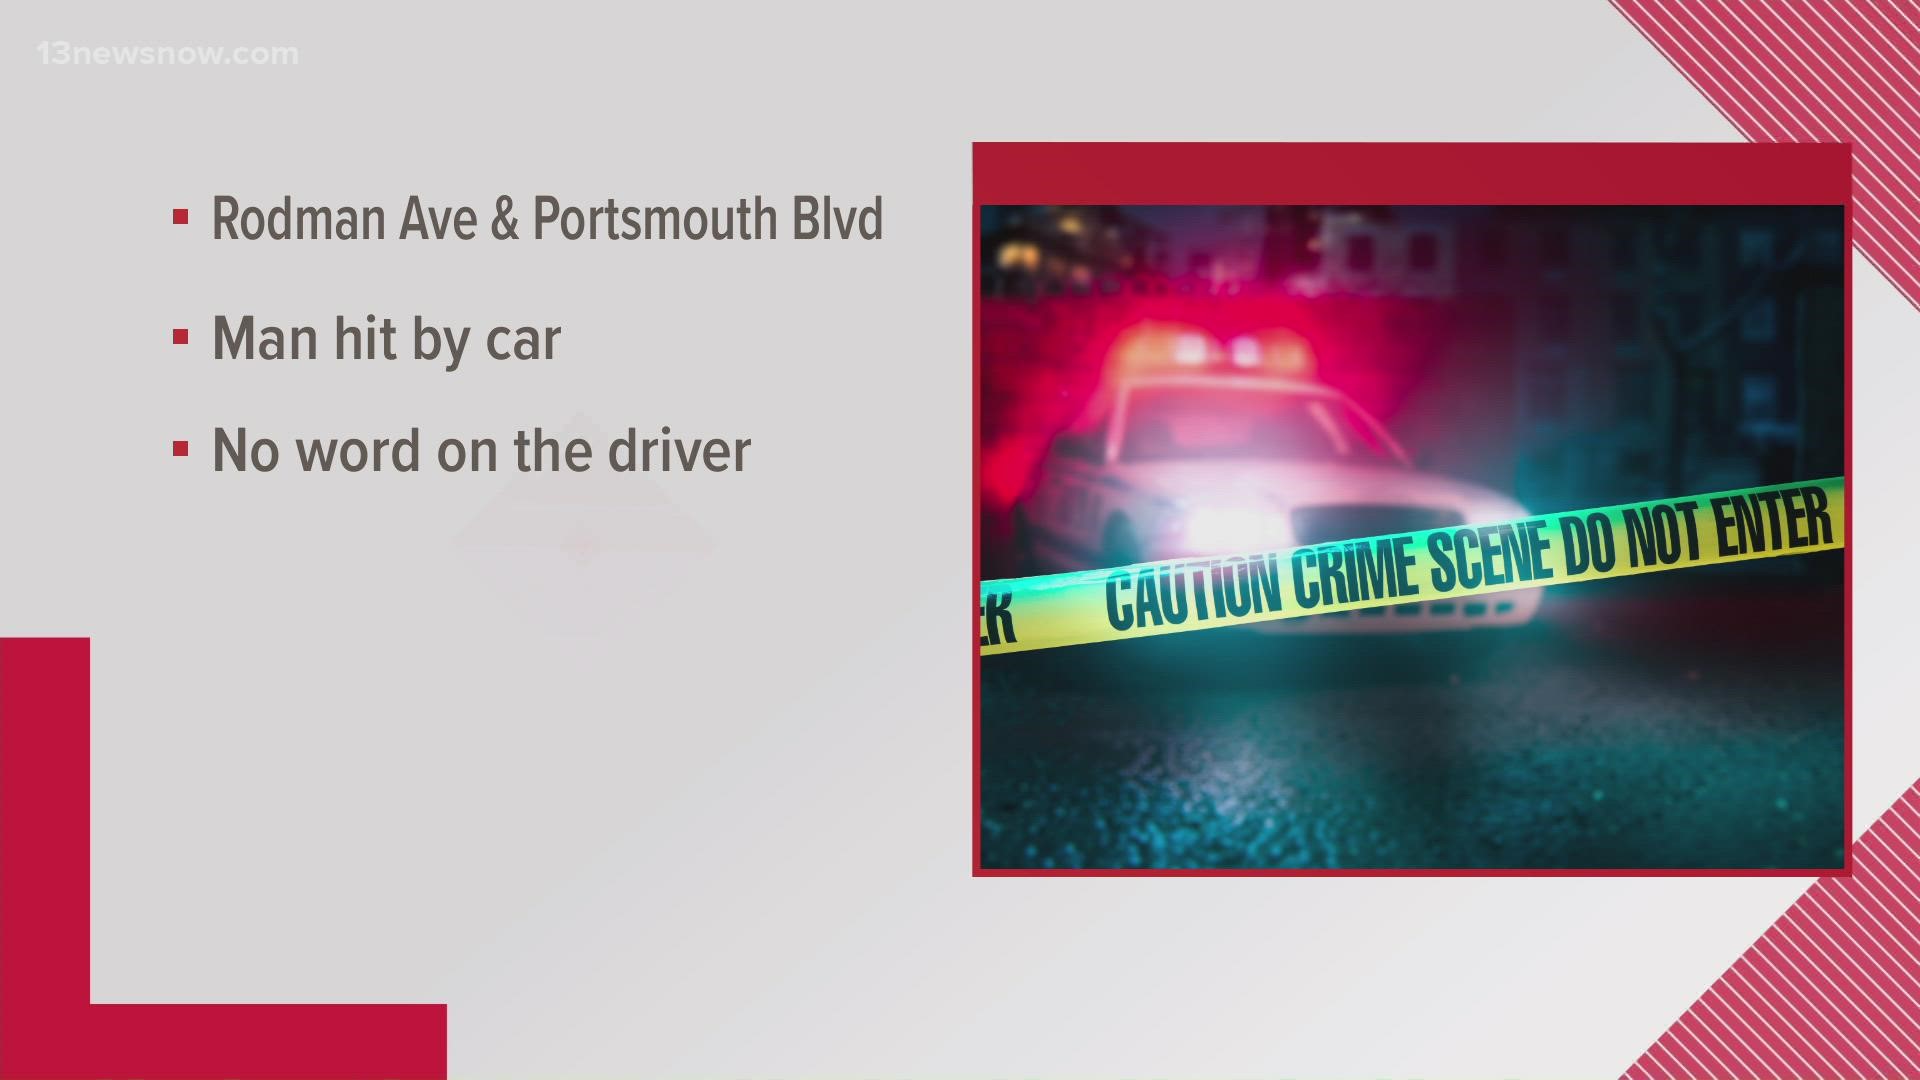 The crash happened near the intersection of Rodman Avenue and Portsmouth Blvd.